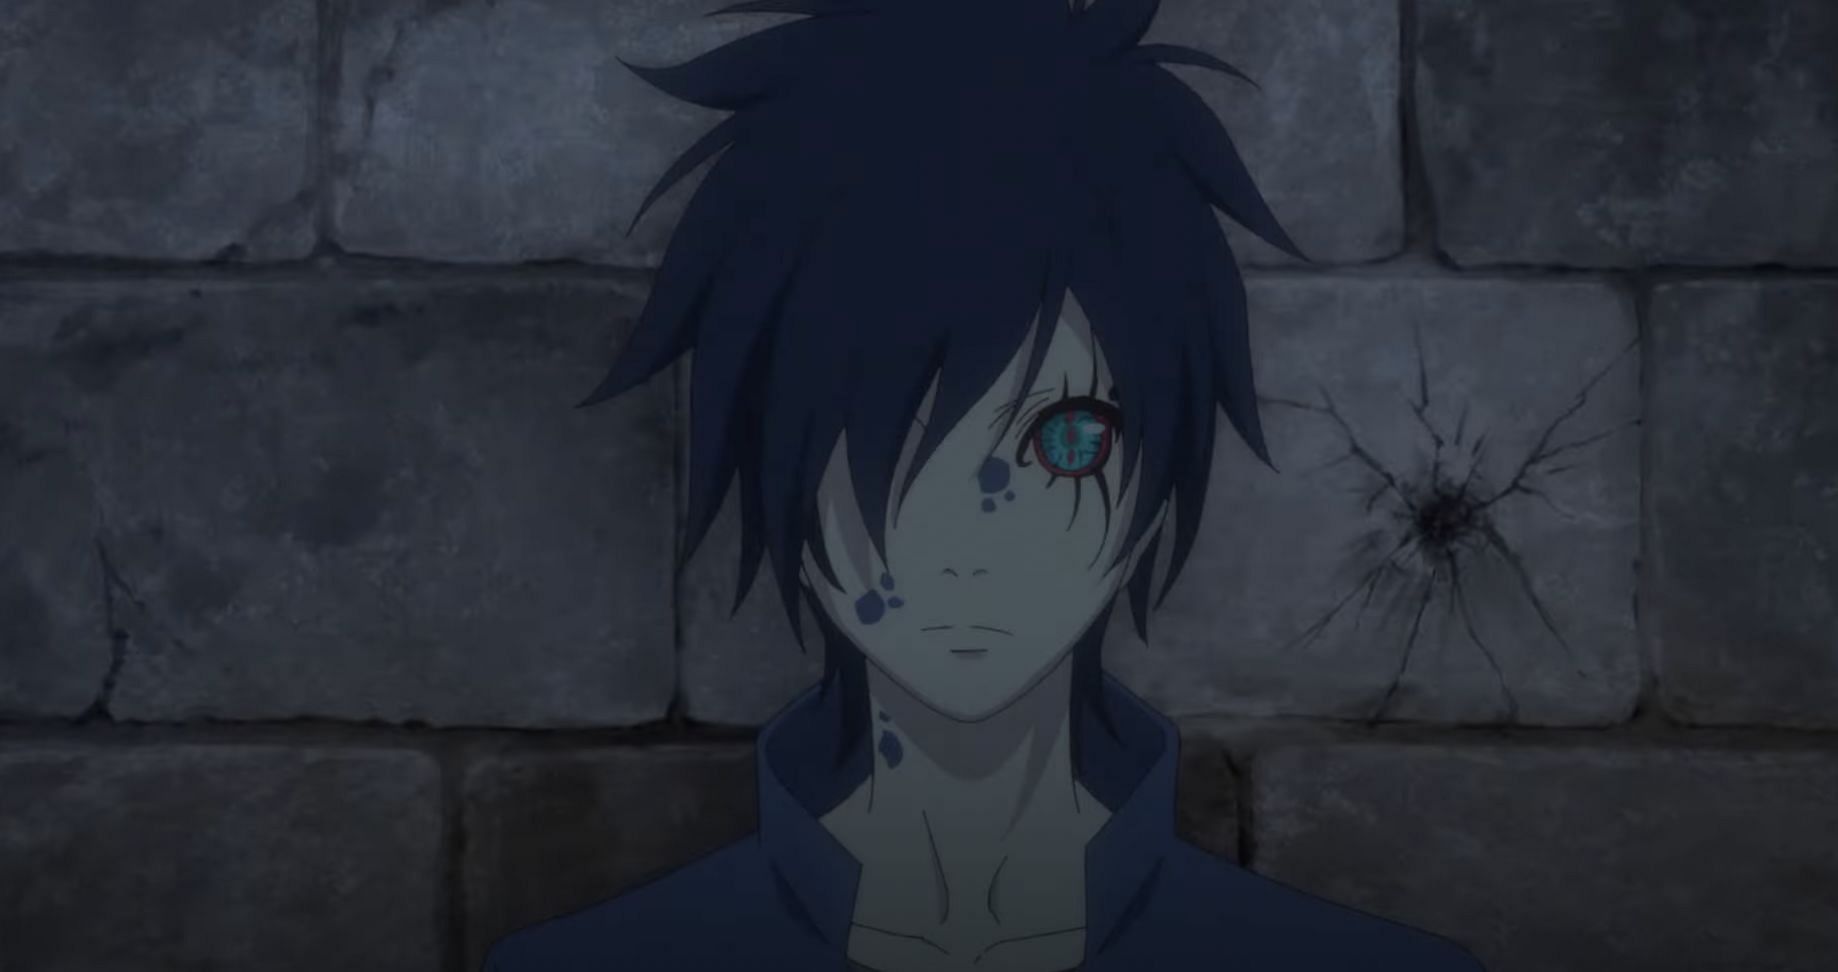 Koku as seen in B: The Beginning (Image via Production I.G)